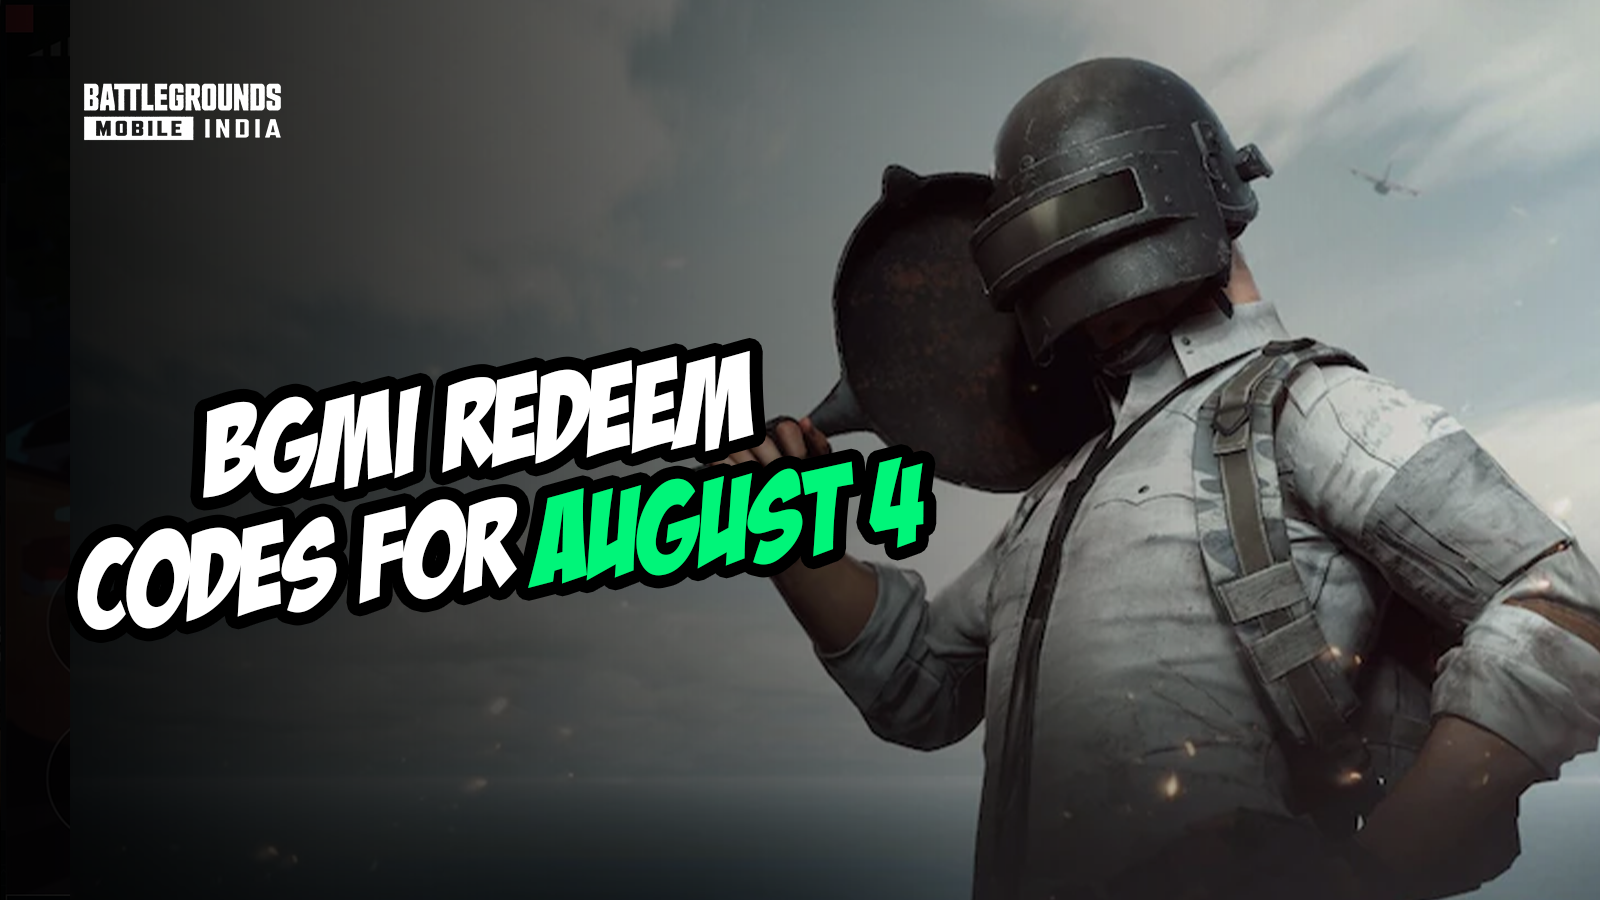 BGMI Redeem Codes for August 4: Unlock Freebies and Enhance Your Gaming Experience!